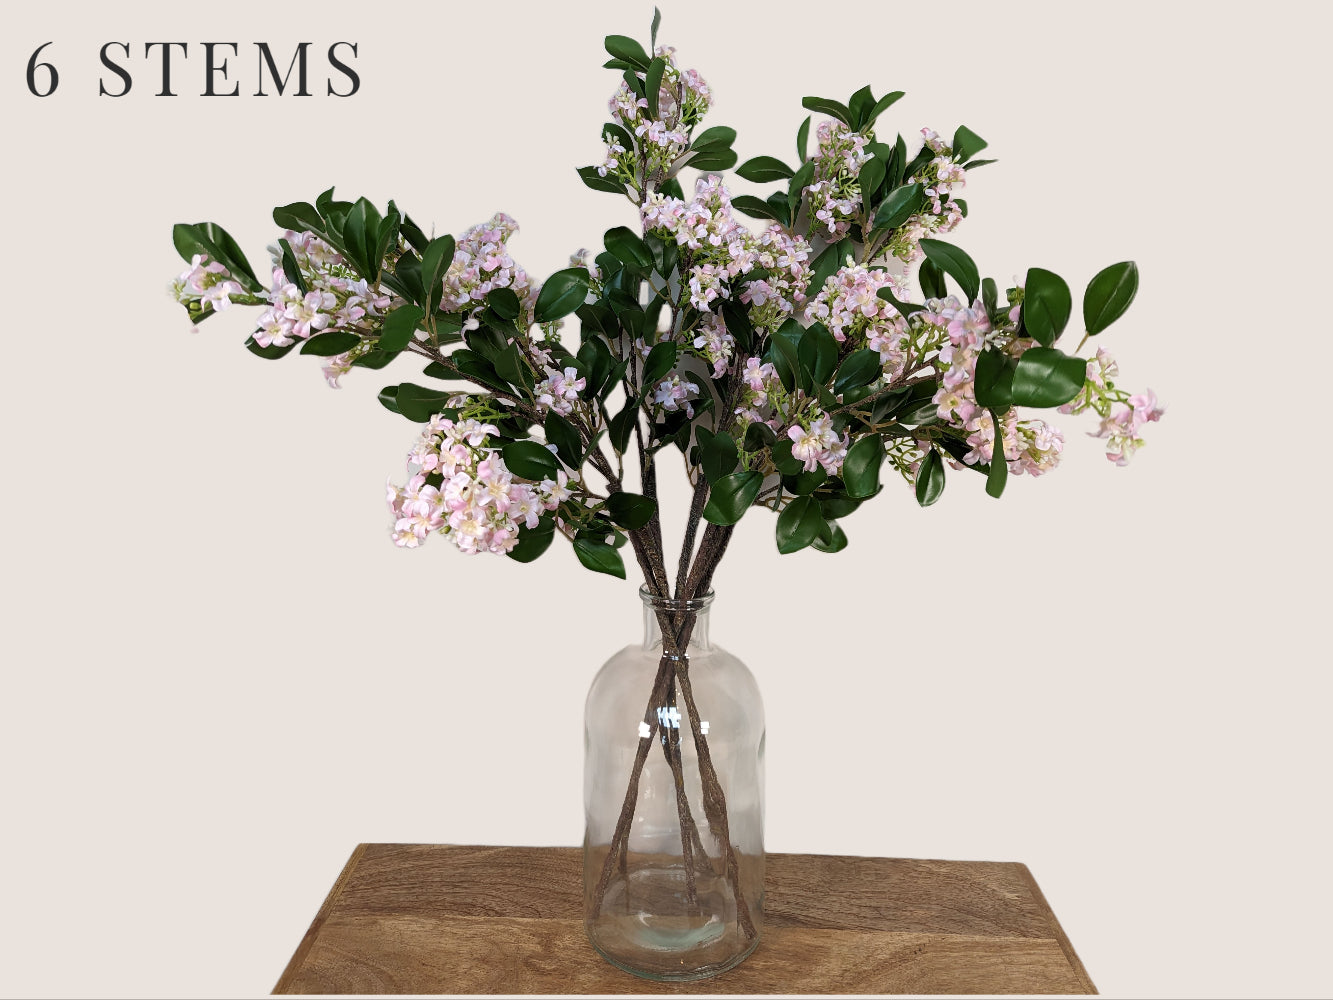 Image of six artificial lilac stems arranged in a clear glass bottleneck vase. The stems are each 30 inches tall and feature lifelike details such as white, pink, and light green petals with a dark brown stem. The buds are light green and the stem has realistic texture and detailing. The arrangement is against a neutral beige background.